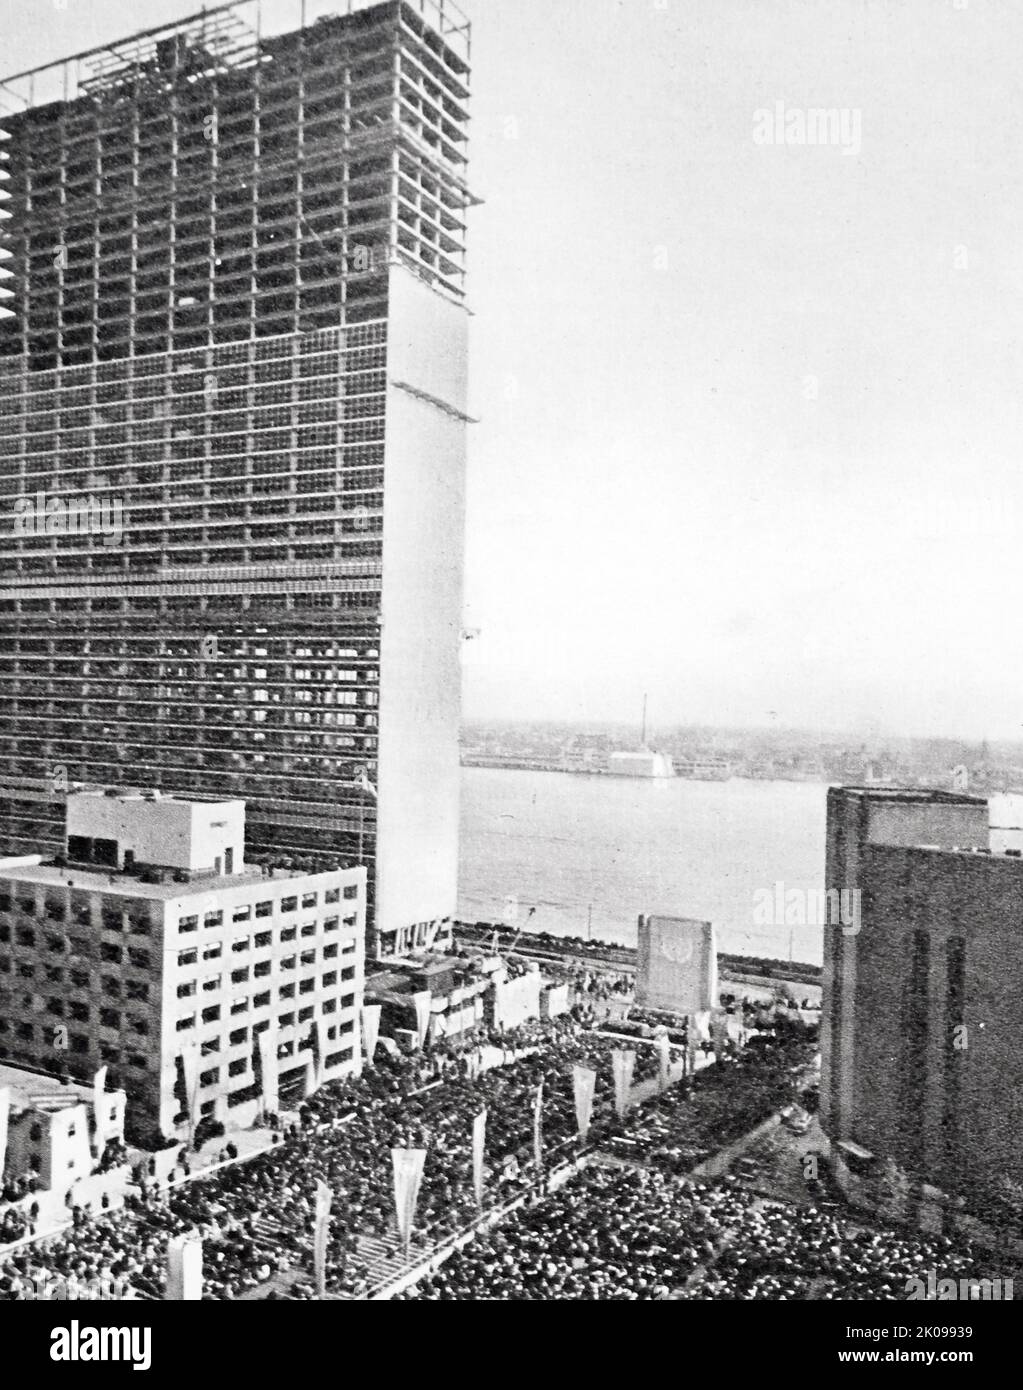 The United Nations Secretariat Building is a 505-foot (154 m) tall skyscraper and the centerpiece of the headquarters of the United Nations, in the Turtle Bay/East Midtown neighborhood of Manhattan in New York City. The groundbreaking ceremony for the Secretariat Building occurred on September 14, 1948. Stock Photo